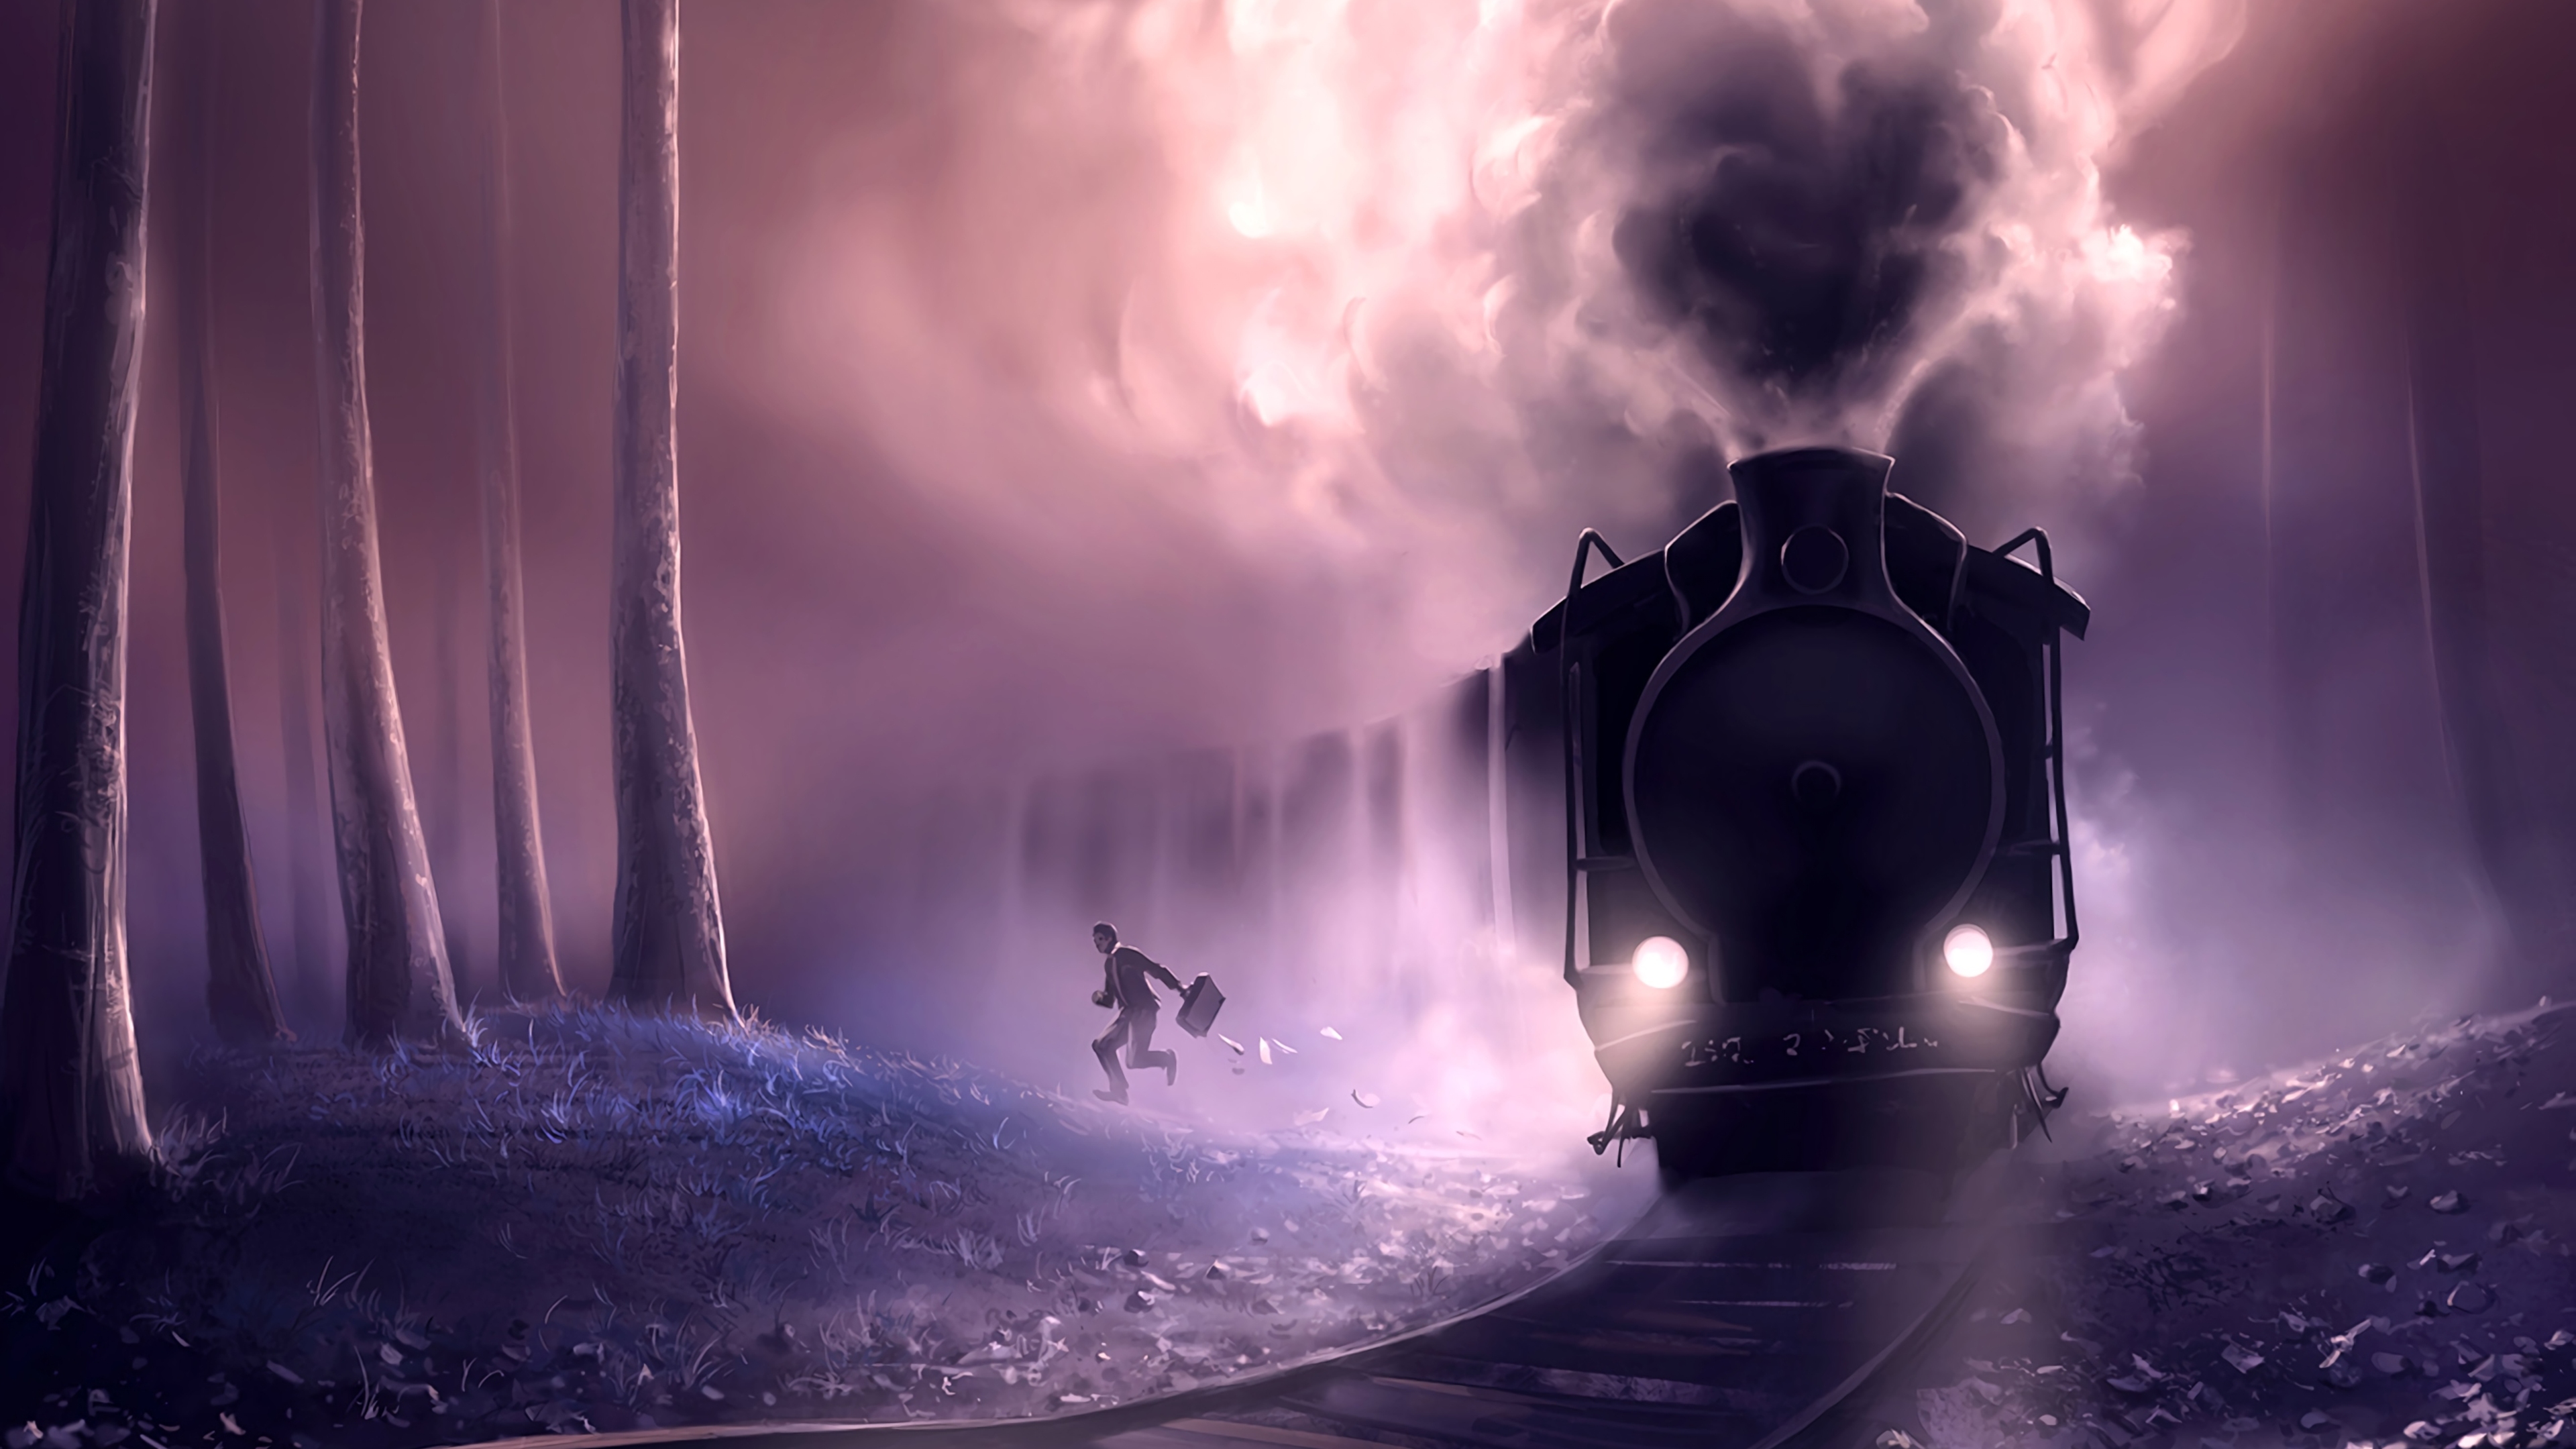 Train 4K wallpaper for your desktop or mobile screen free and easy to download